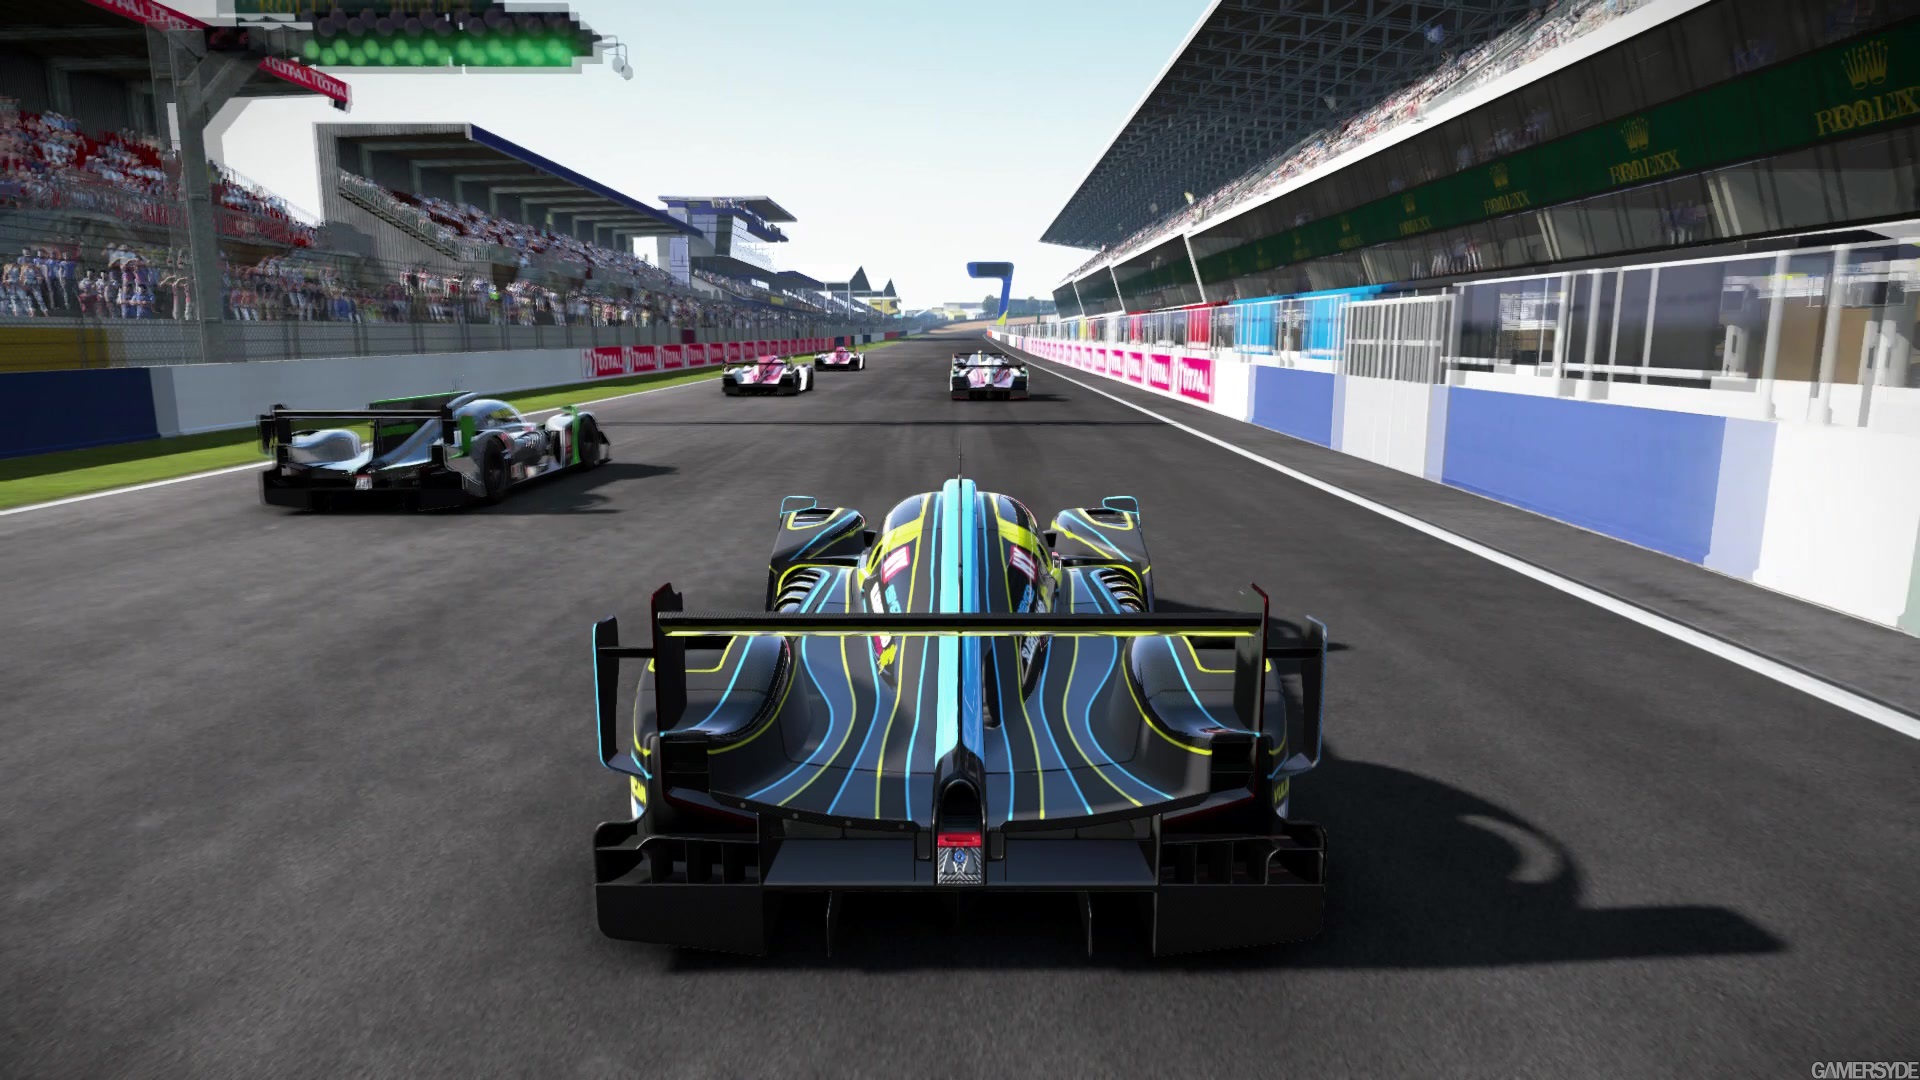 Project CARS Le Mans - External view - High quality stream download Gamersyde